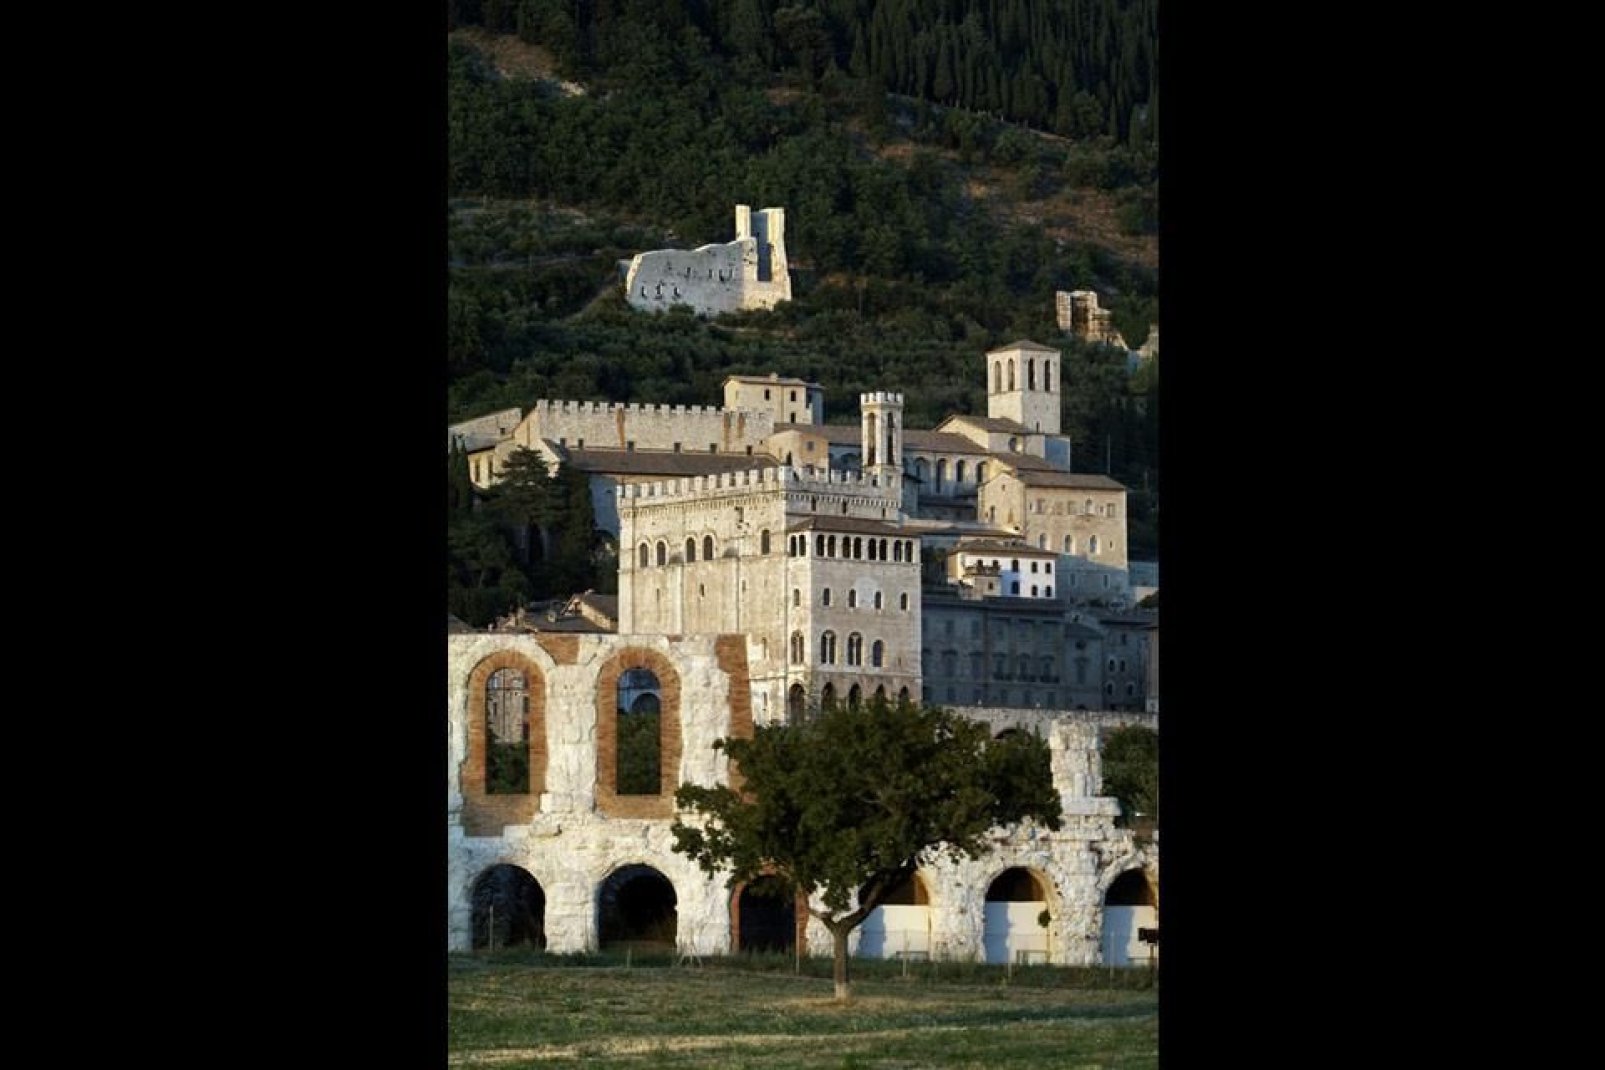 Gubbio's past is marked by prosperity and power, partly due to its location.